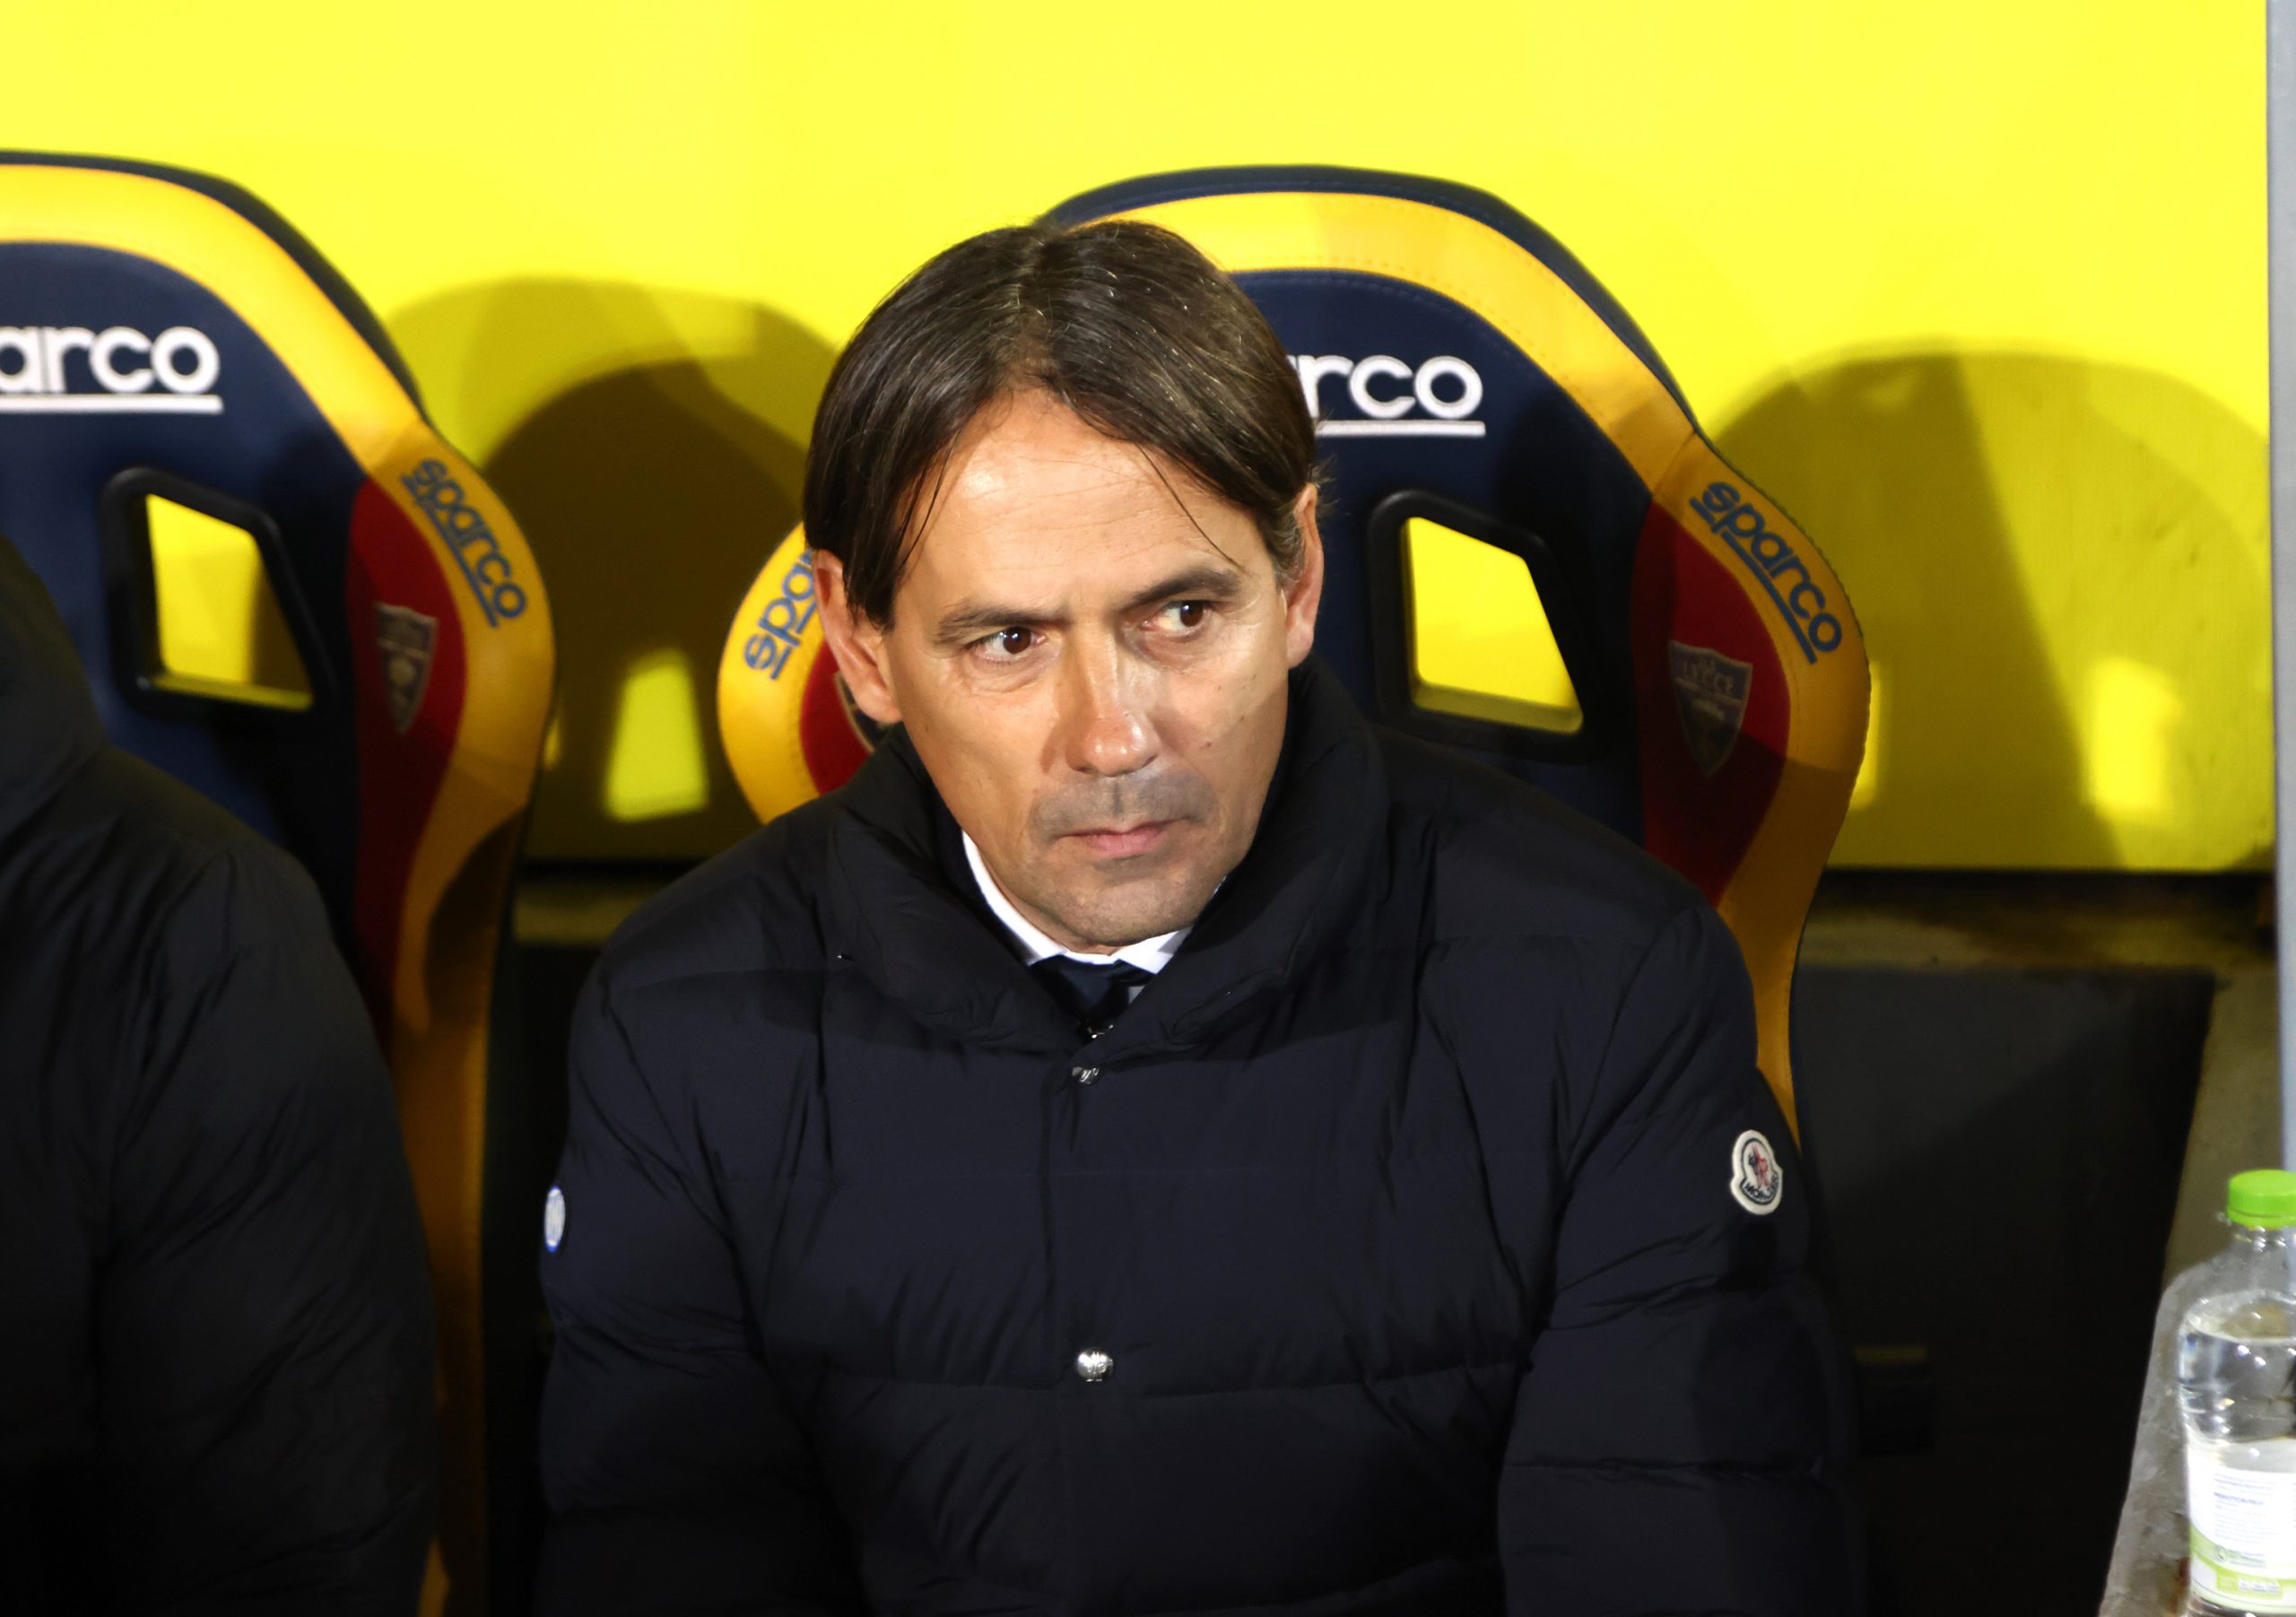 Simone Inzaghi in Lecce-Inter di Serie A (Photo by Maurizio Laganà/Getty Images via OneFootball)